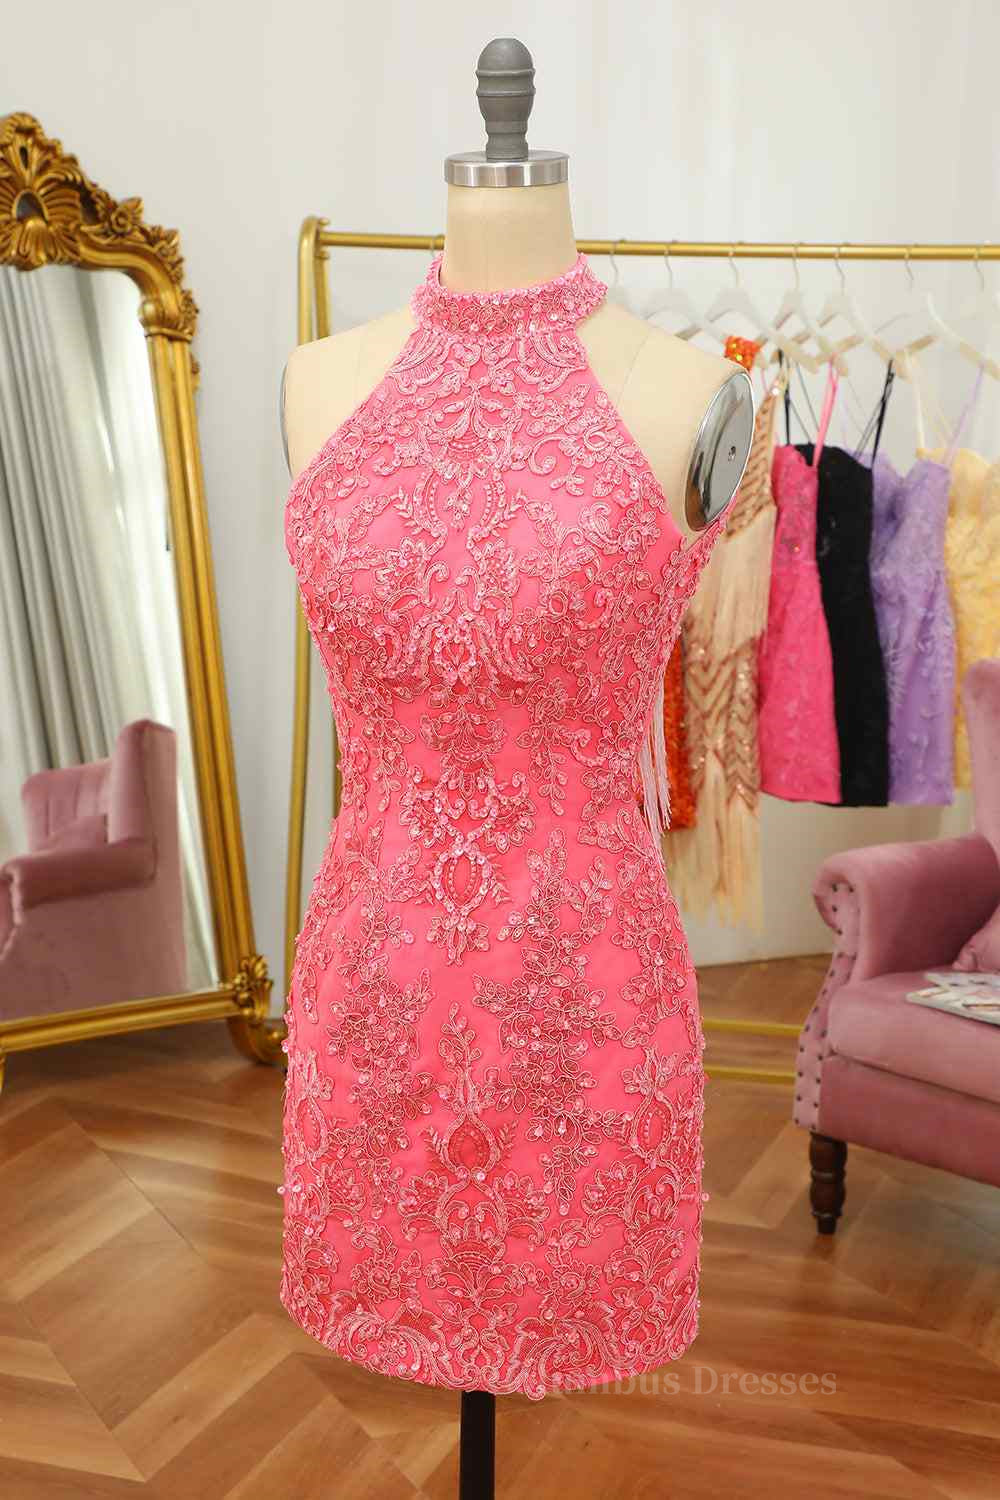 Long Black Dress, Pink Sheath Halter Sequin-Embroidered Cut-Out Mini Homecoming Dress